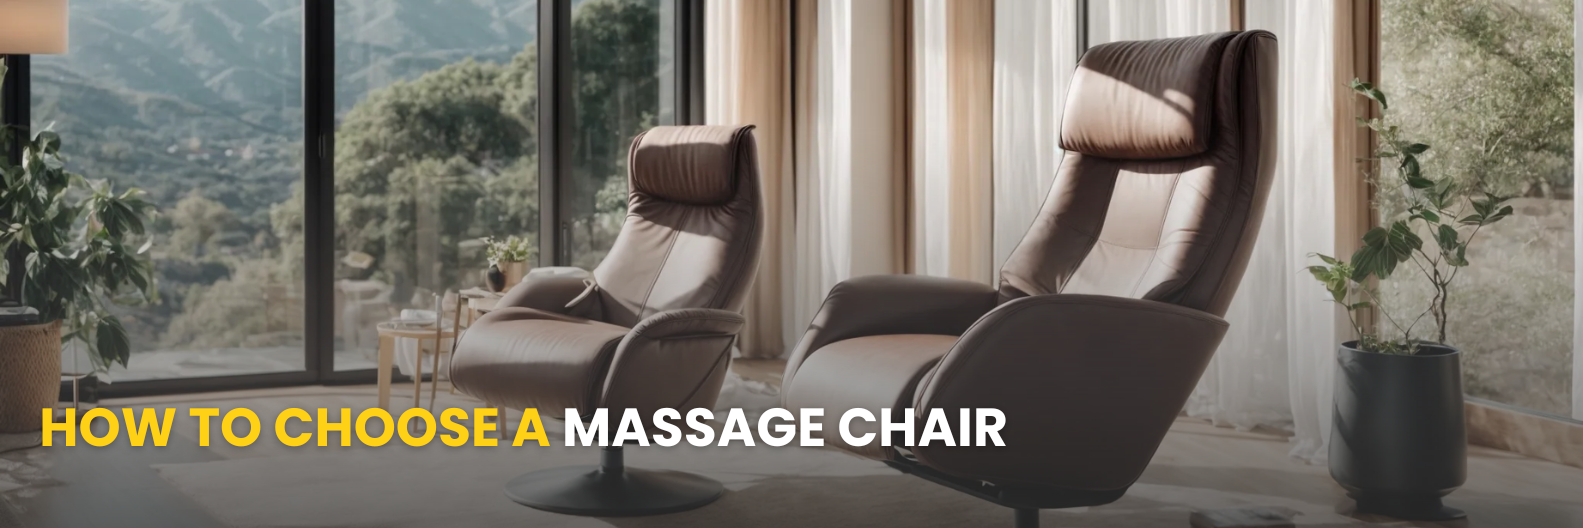 Find best massage chair techniques and buying tips. Explore Osaki, Luraco, Infinity, and Ogawa massage chairs on sale.